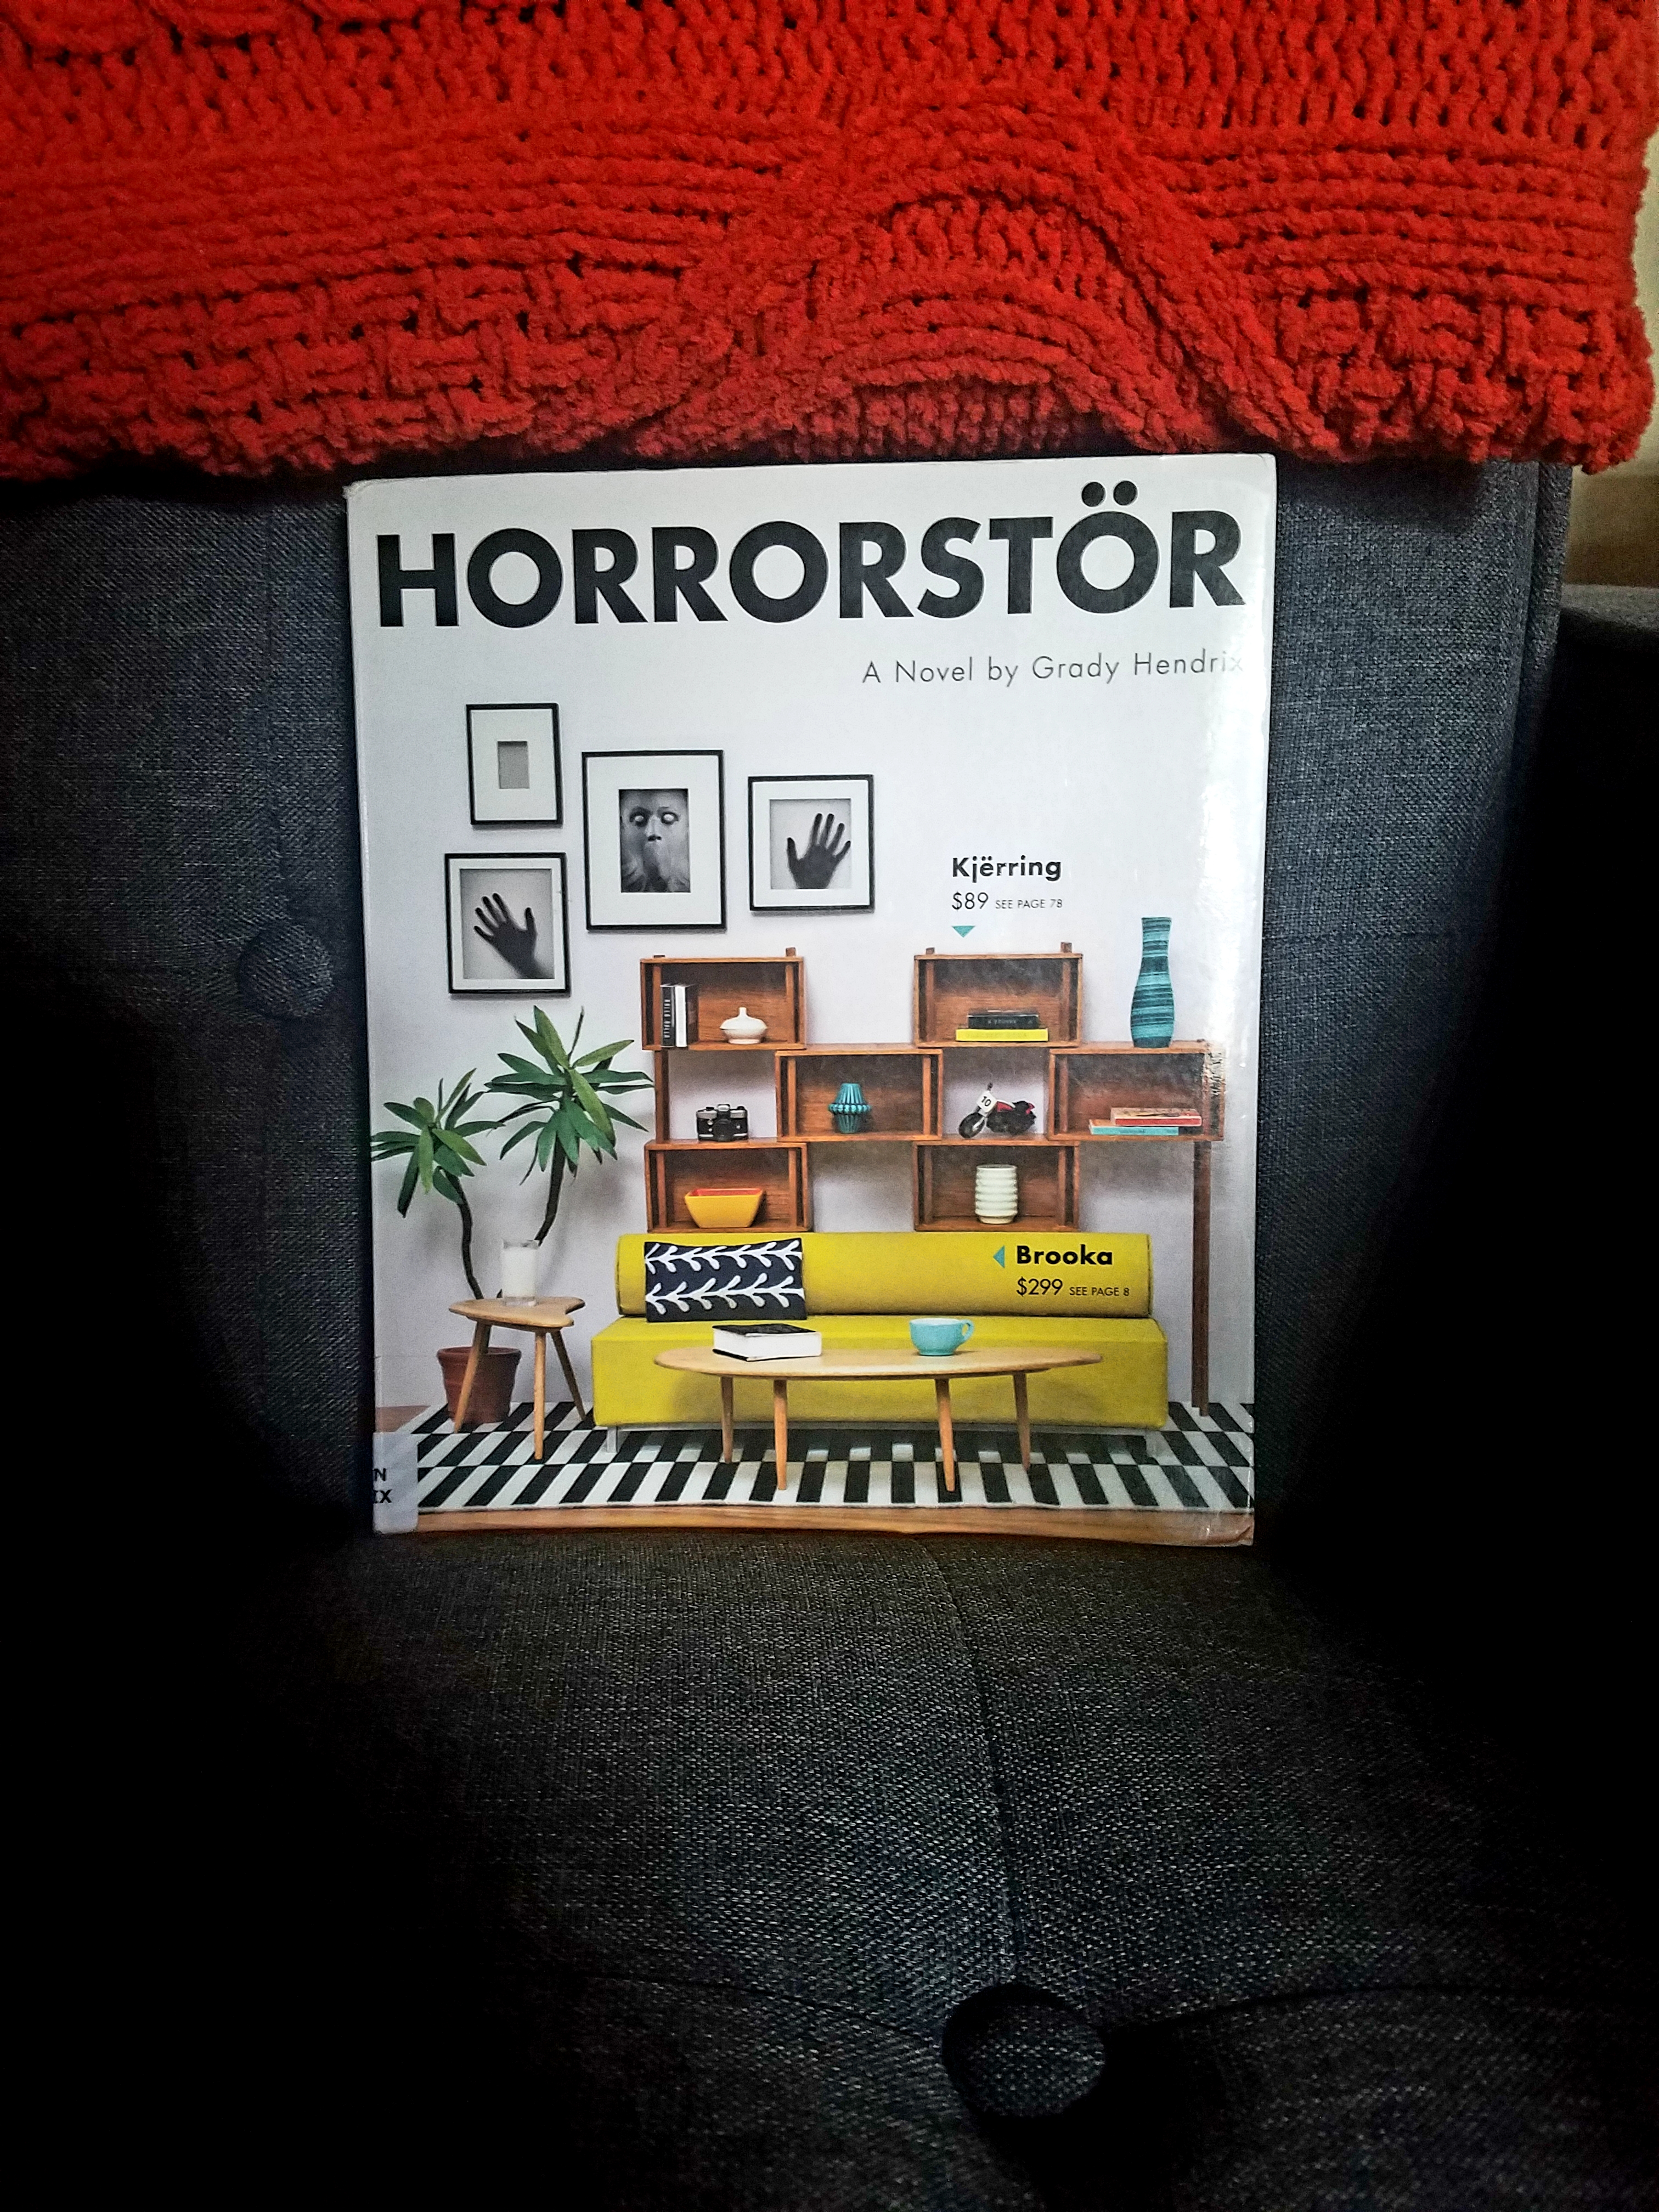 Book Review of HORRORSTOR